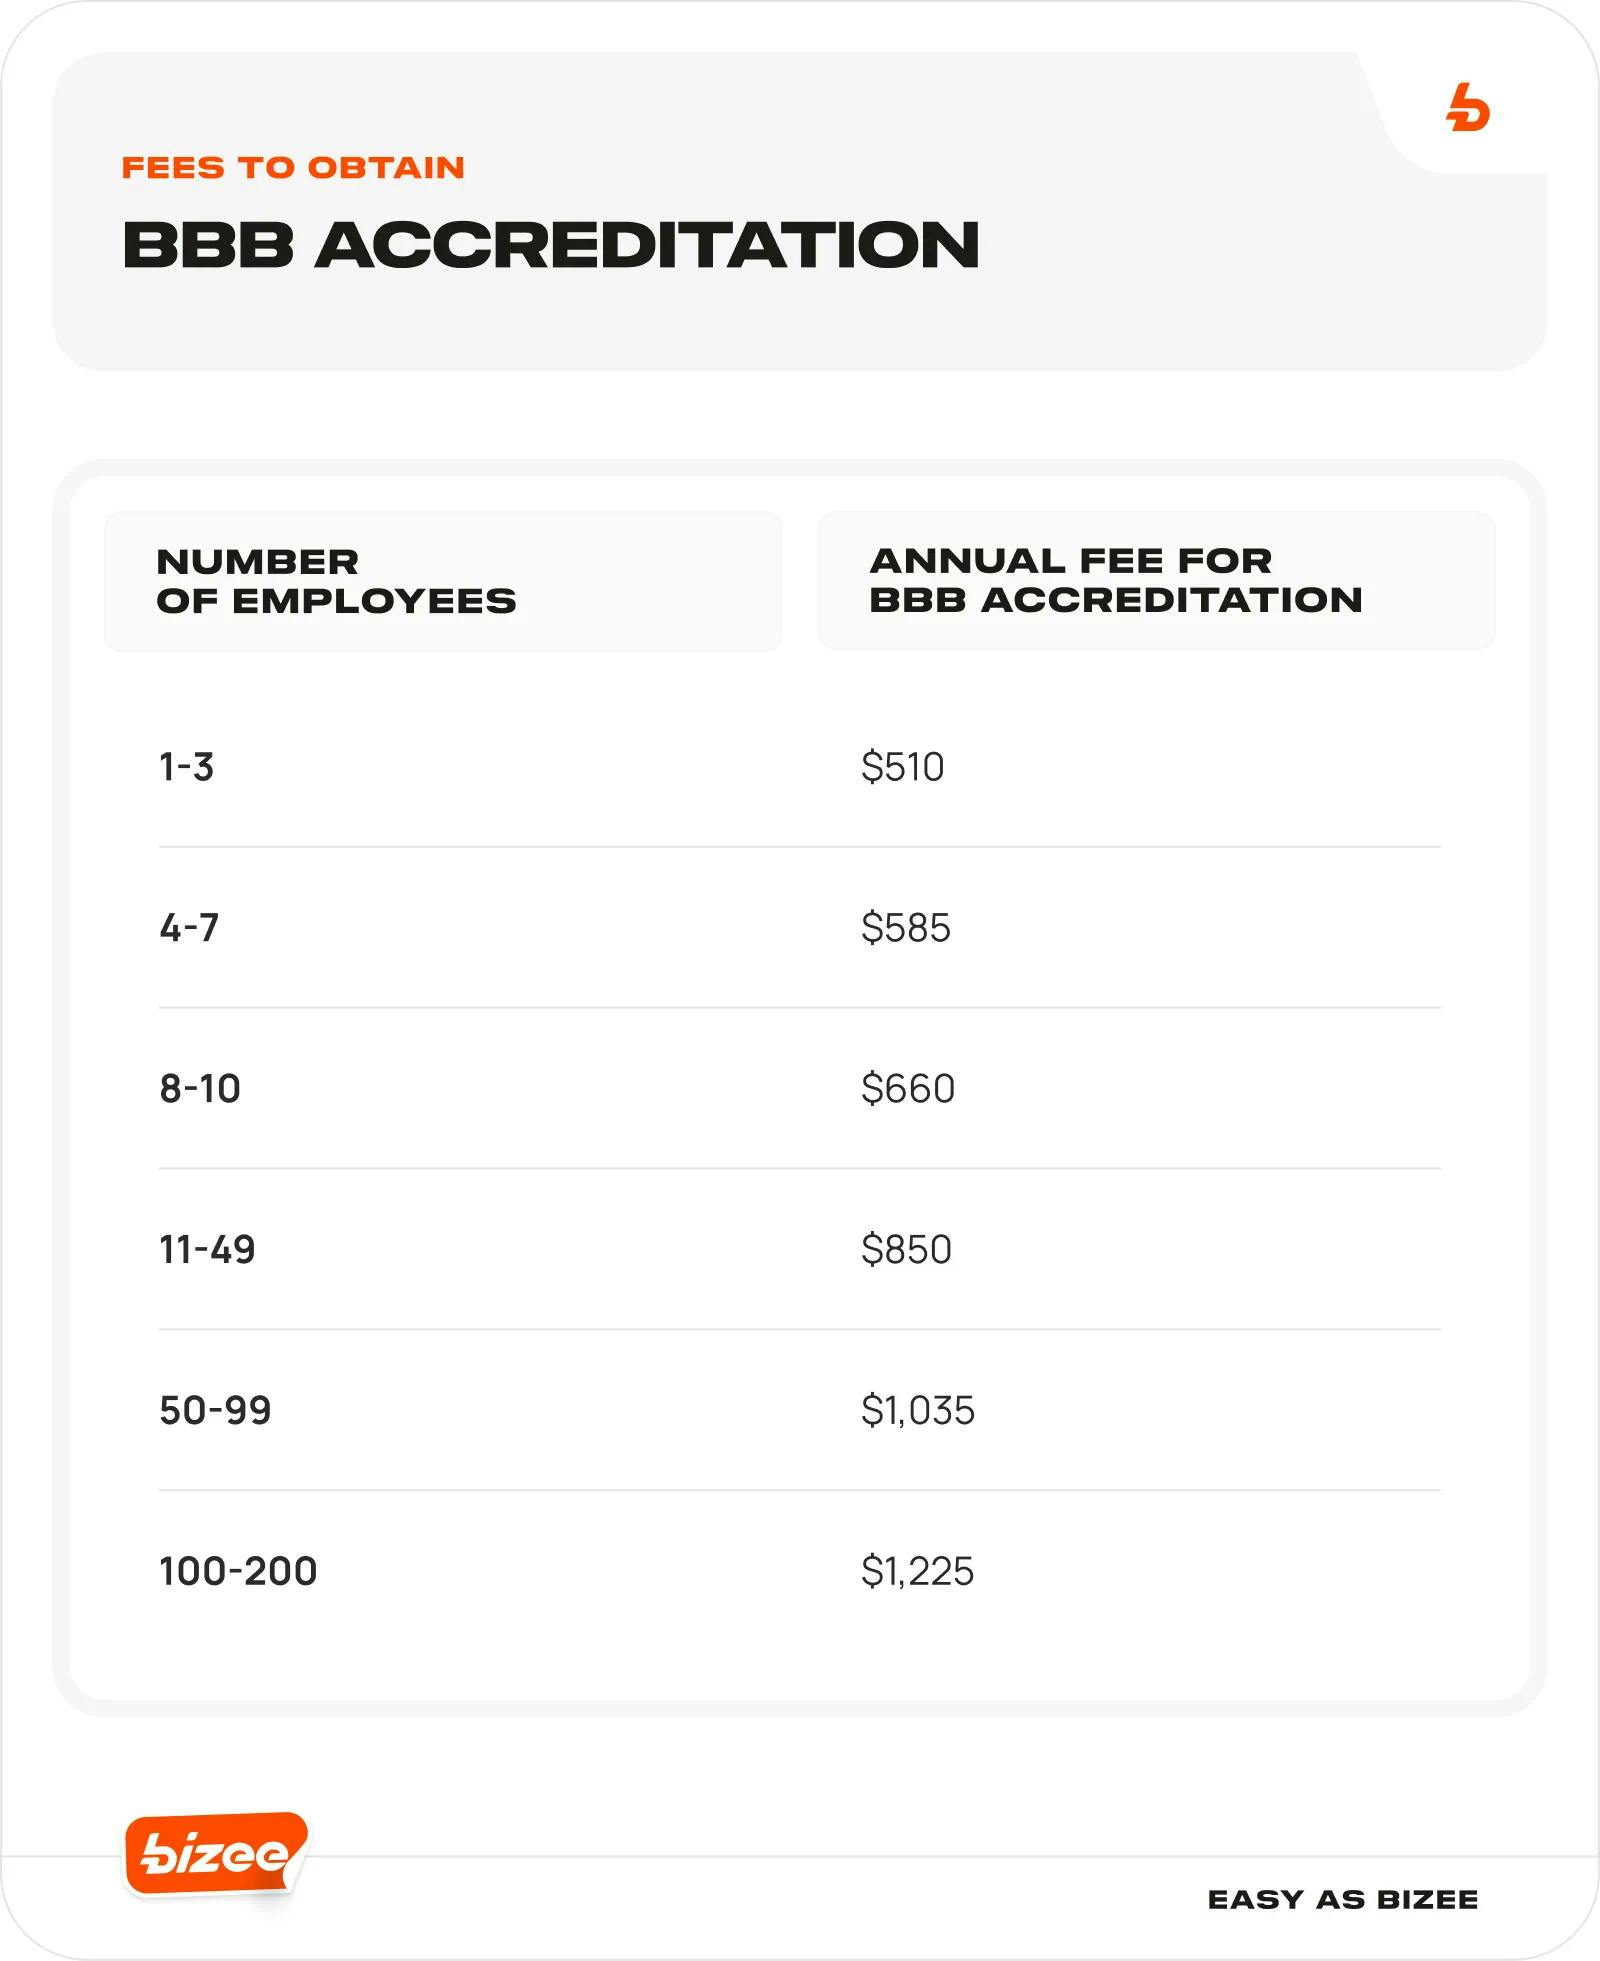 Fees to Obtain BBB Accreditation 